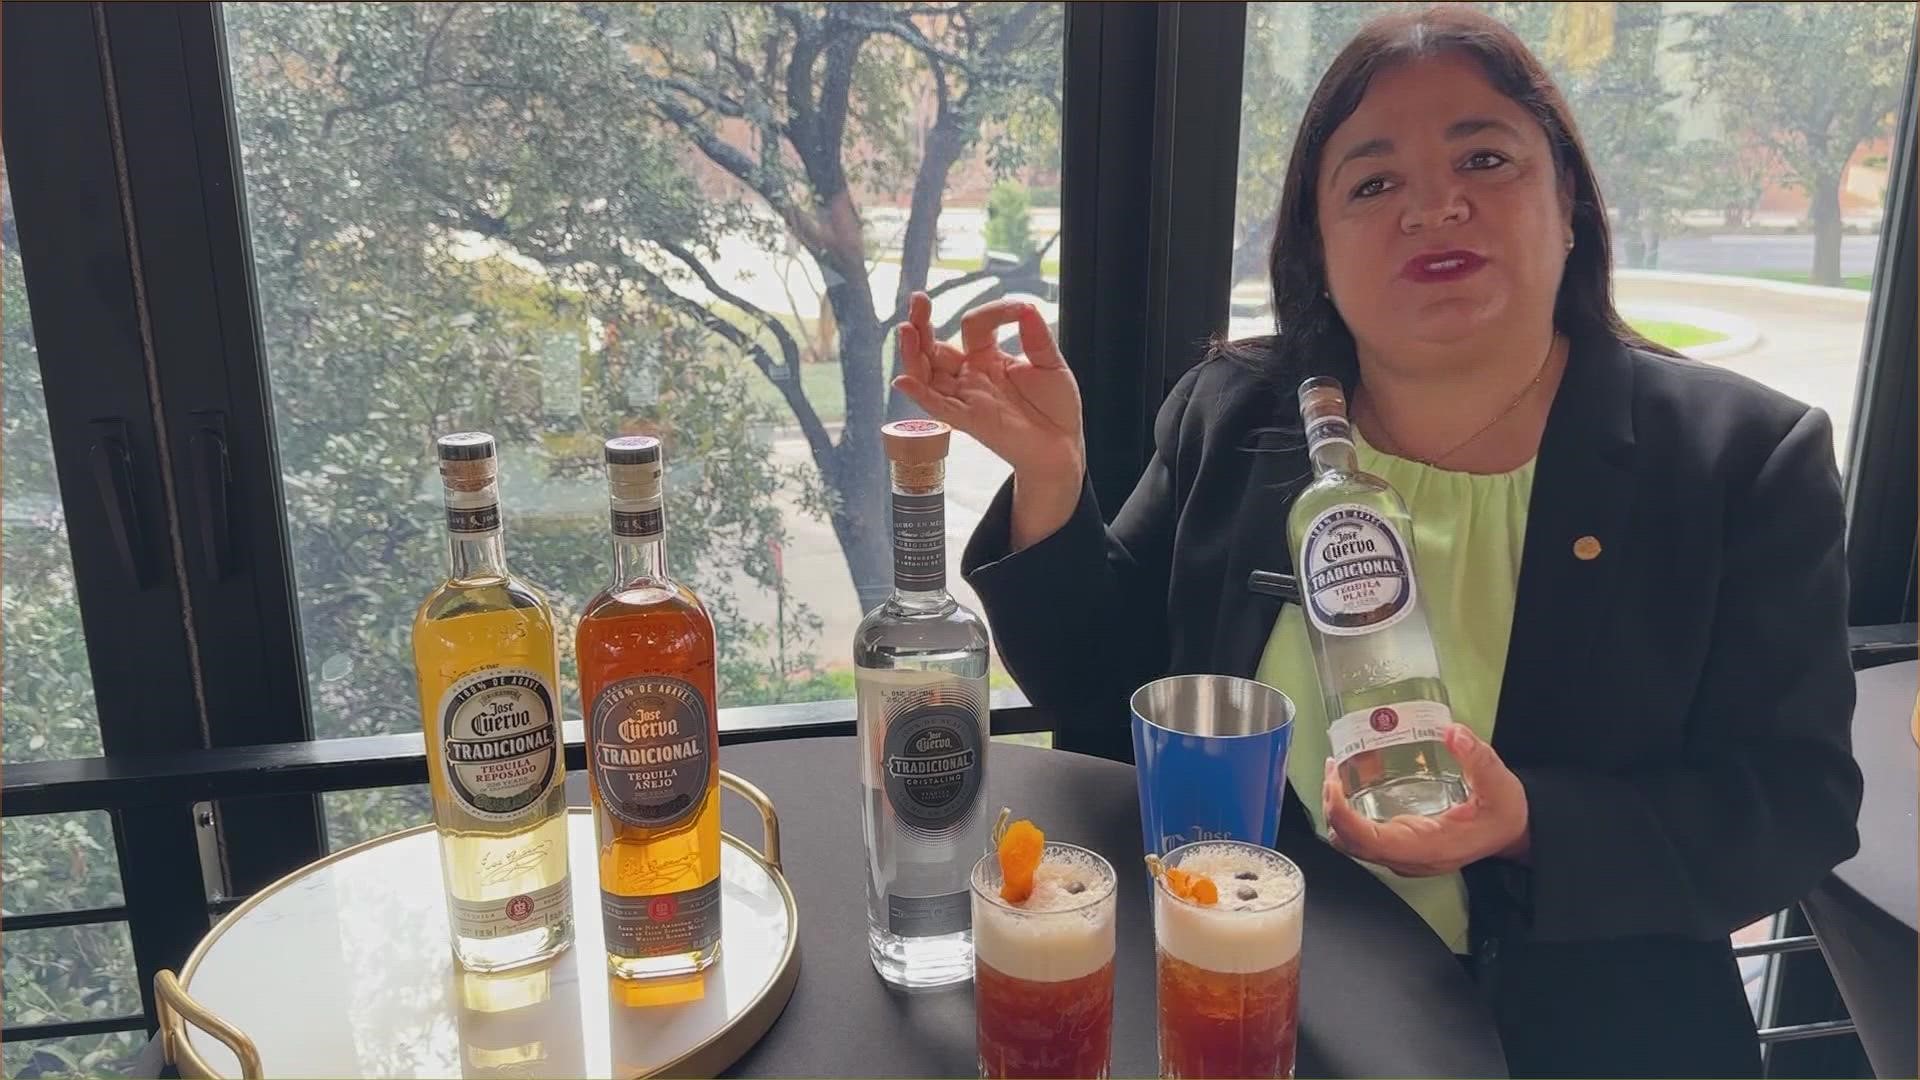 Whether you're looking for a gift to bring to your next holiday party or New Year's celebration, tequila expert Sonia Espínola breaks down what to look for.